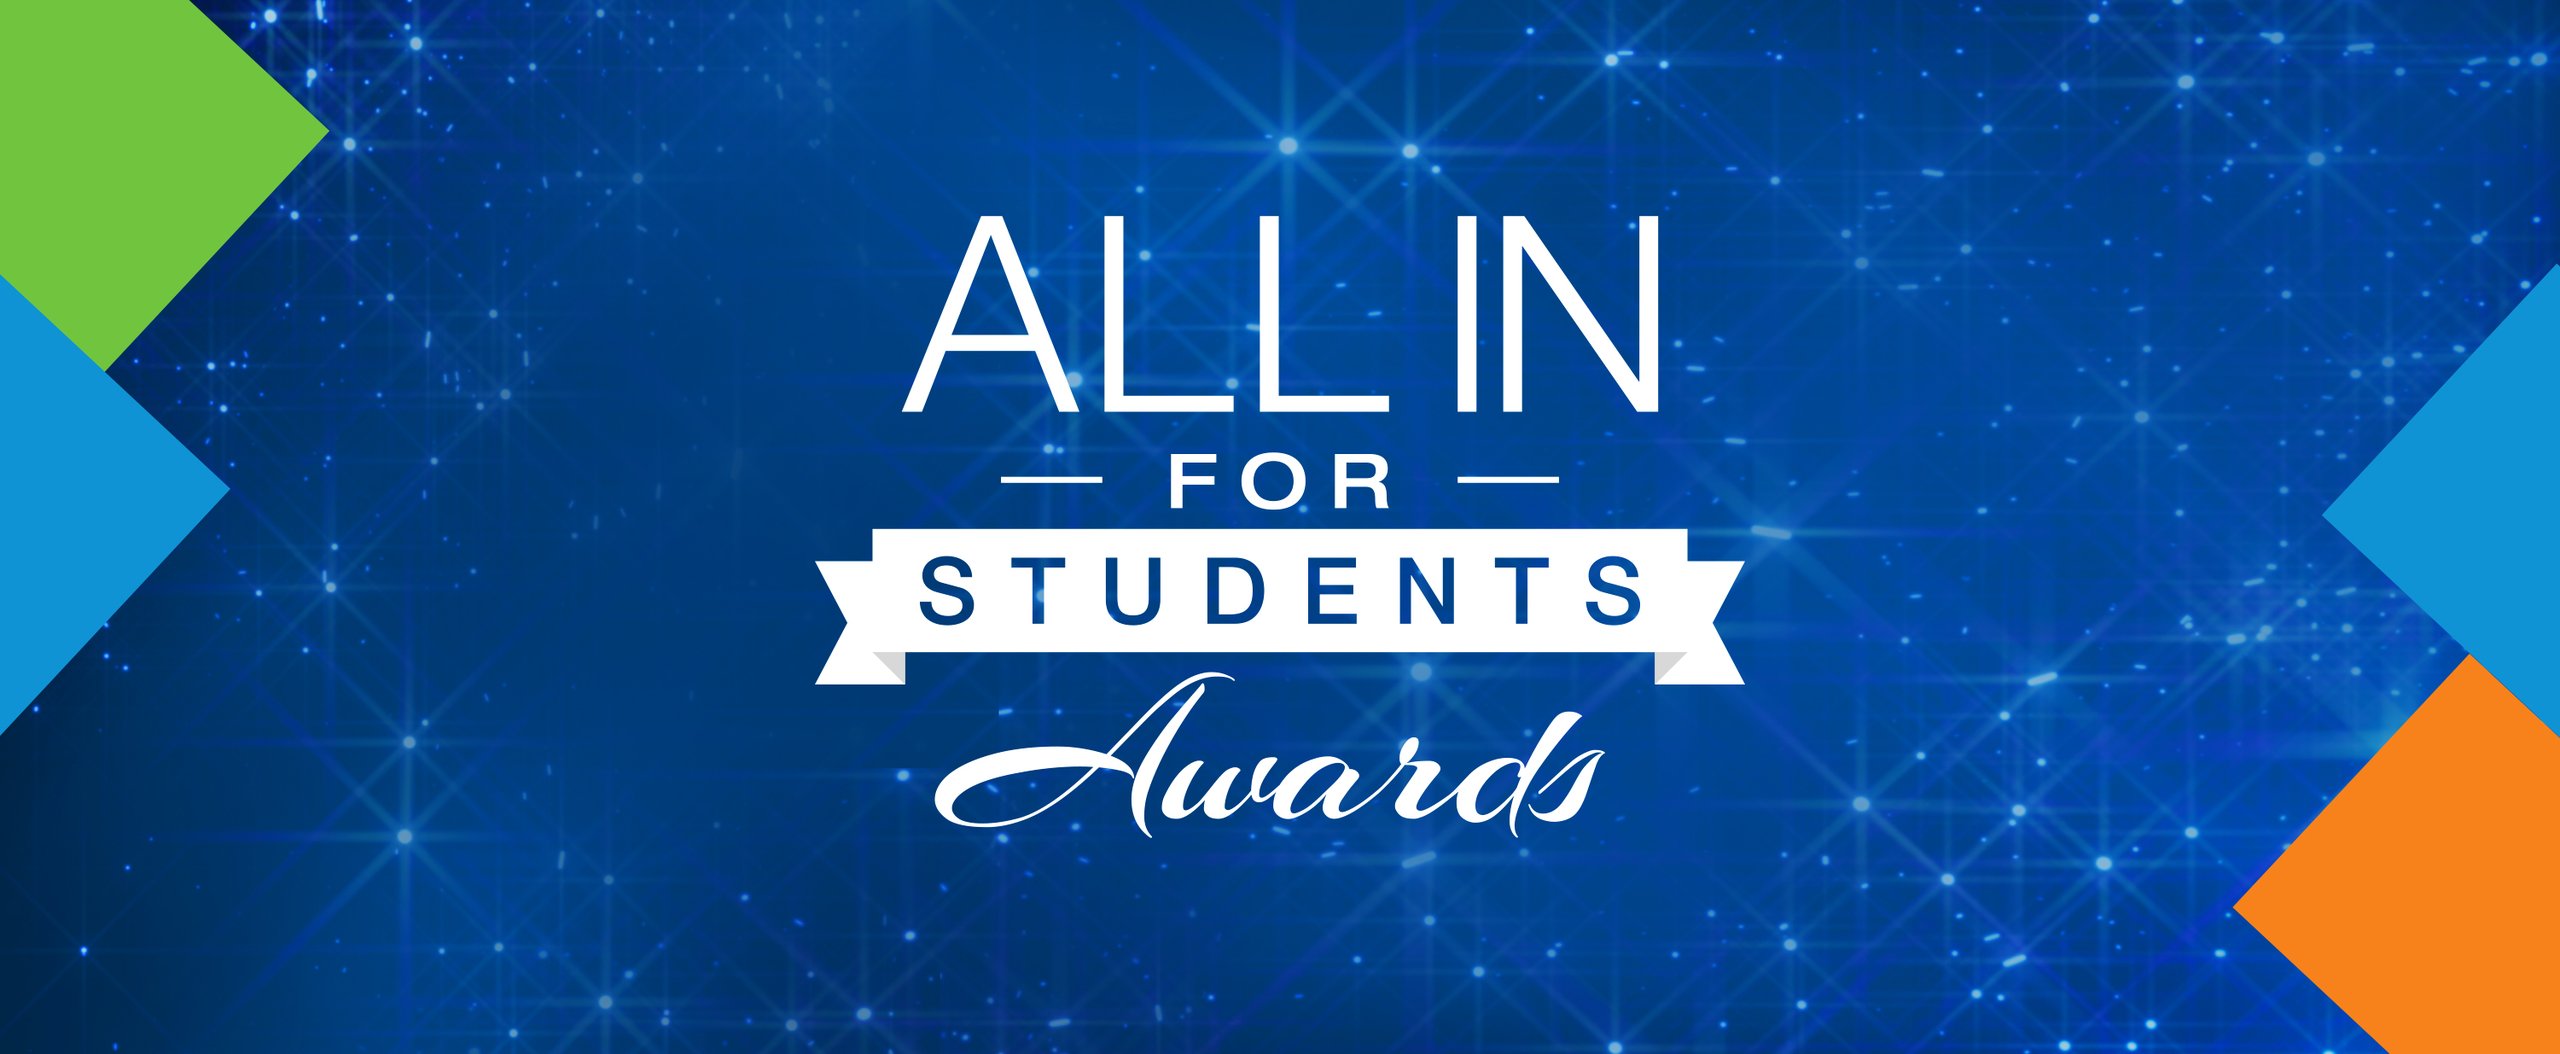 All In for Students Awards